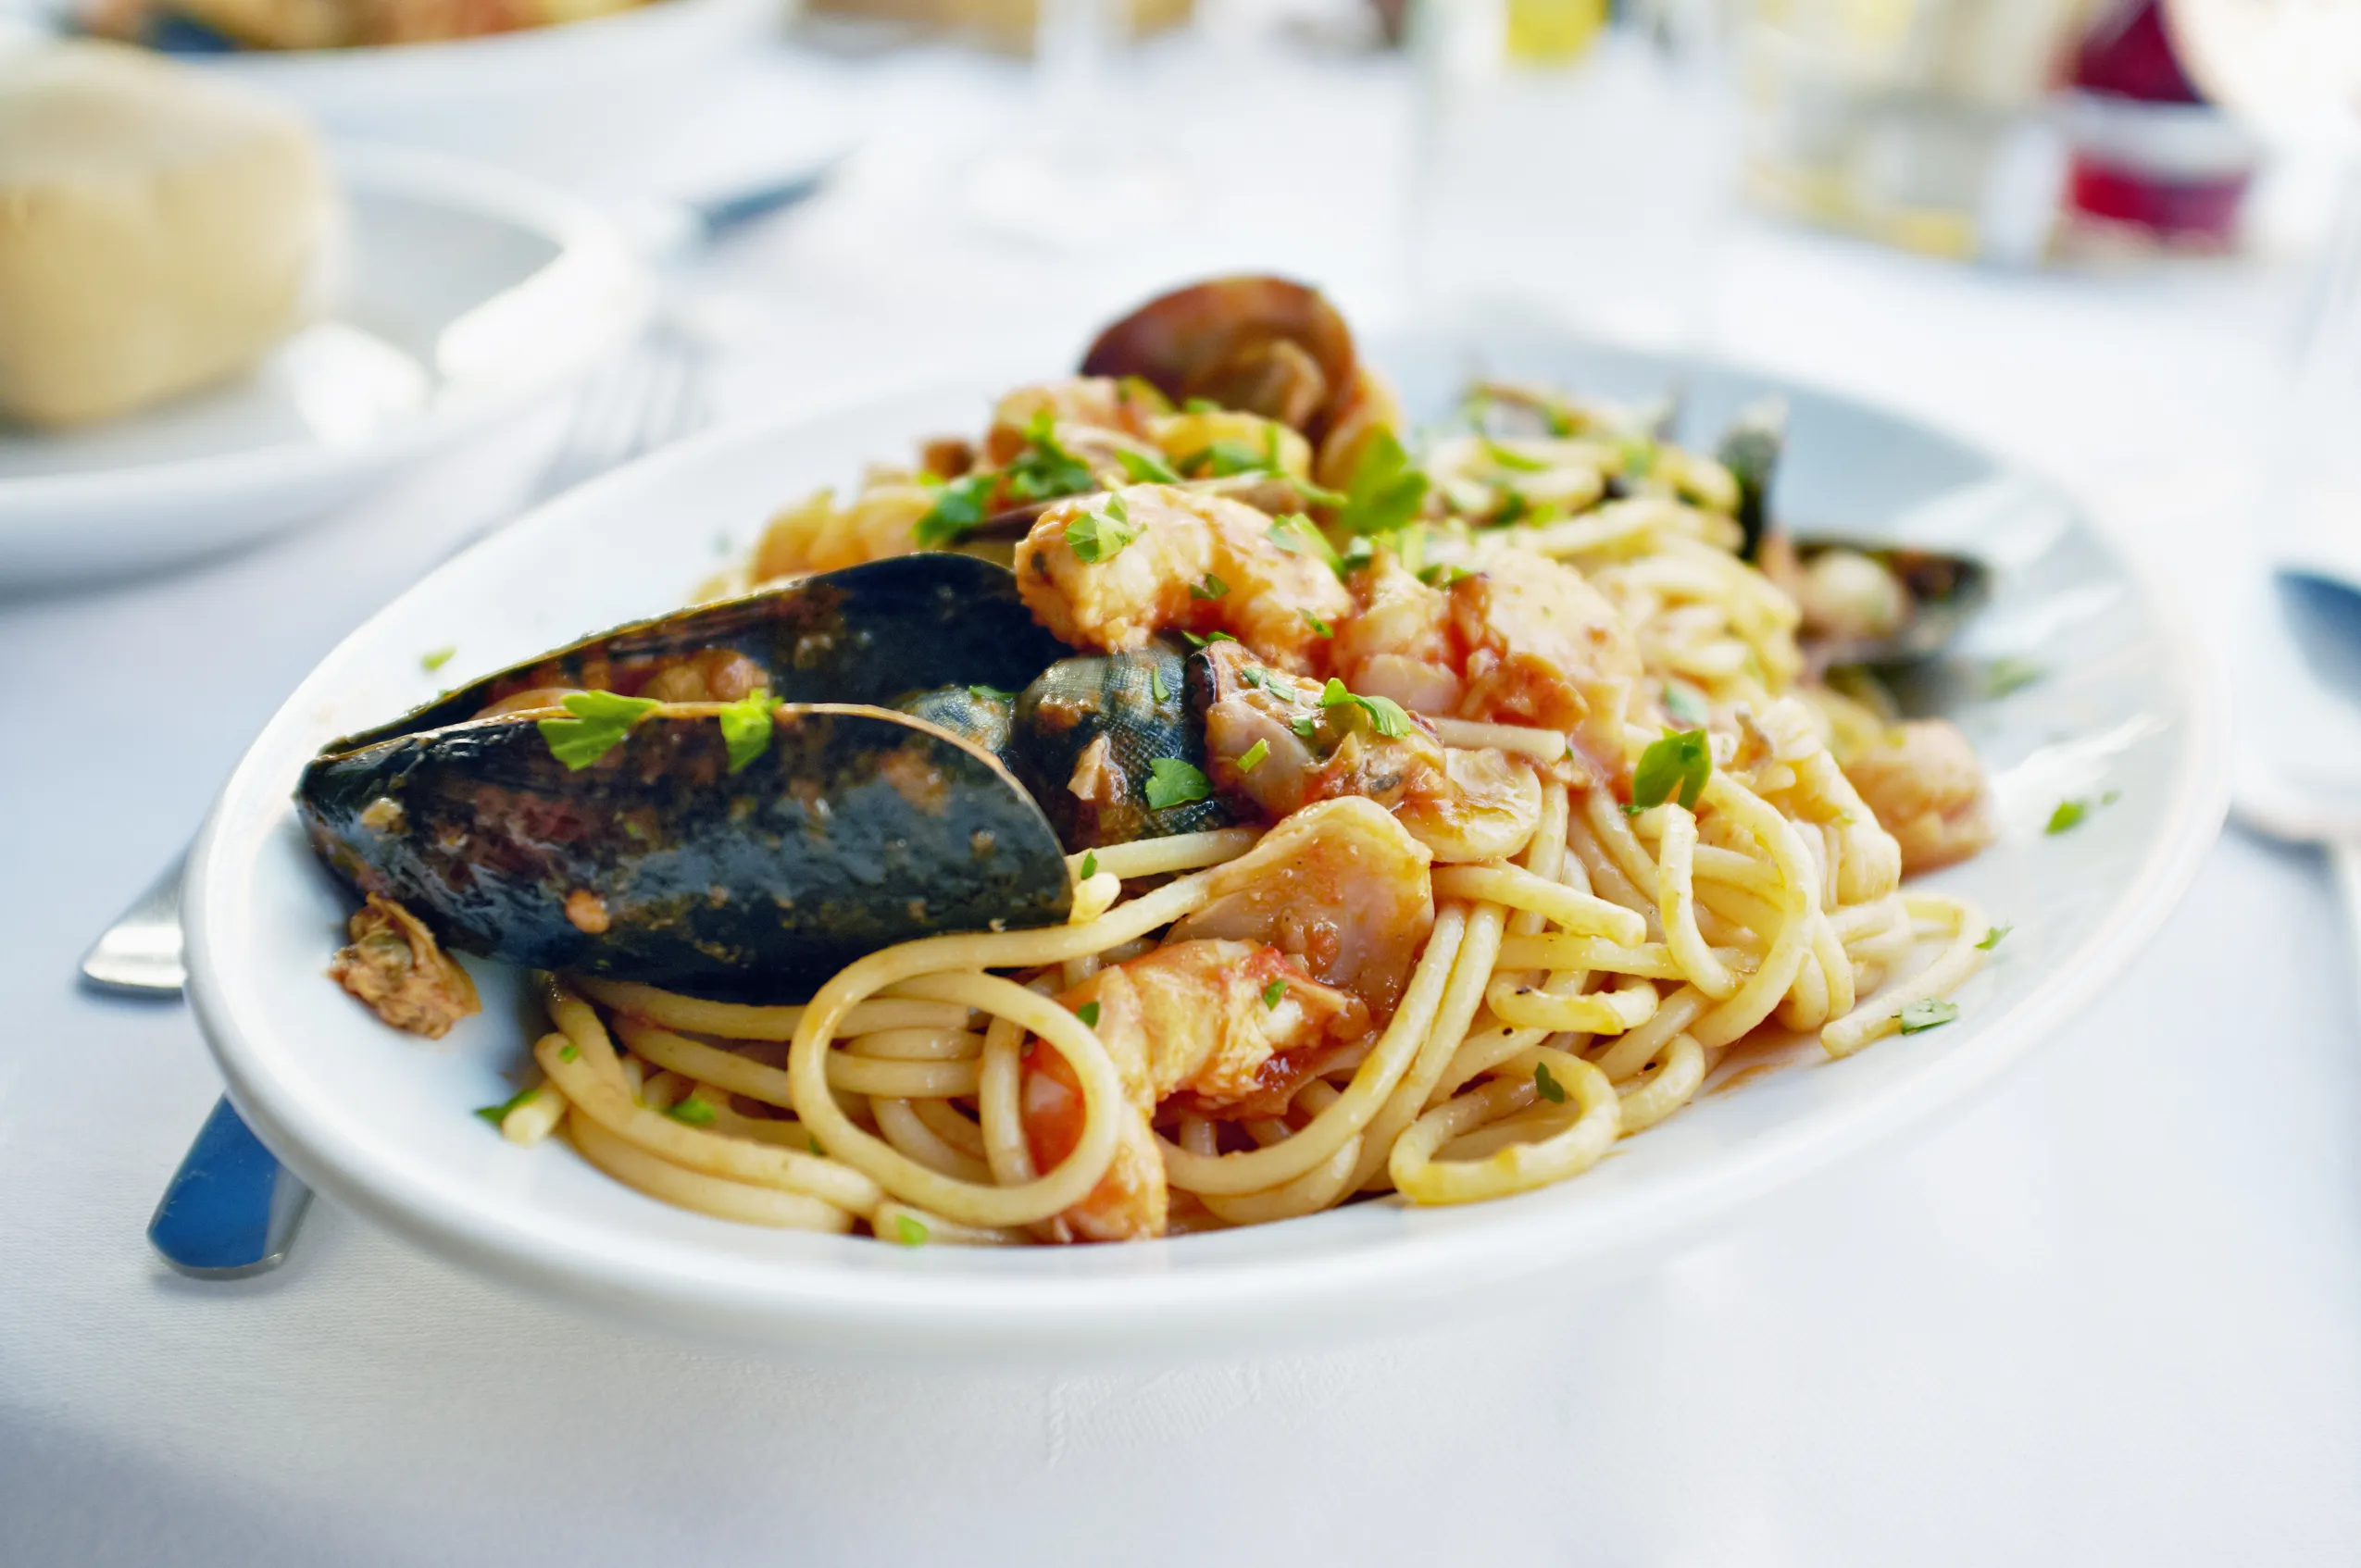 Fresh Seafood pasta - Spaghetti, clams, shrimps and squid, served in a restaurant in Burano, Veneto, Italy.